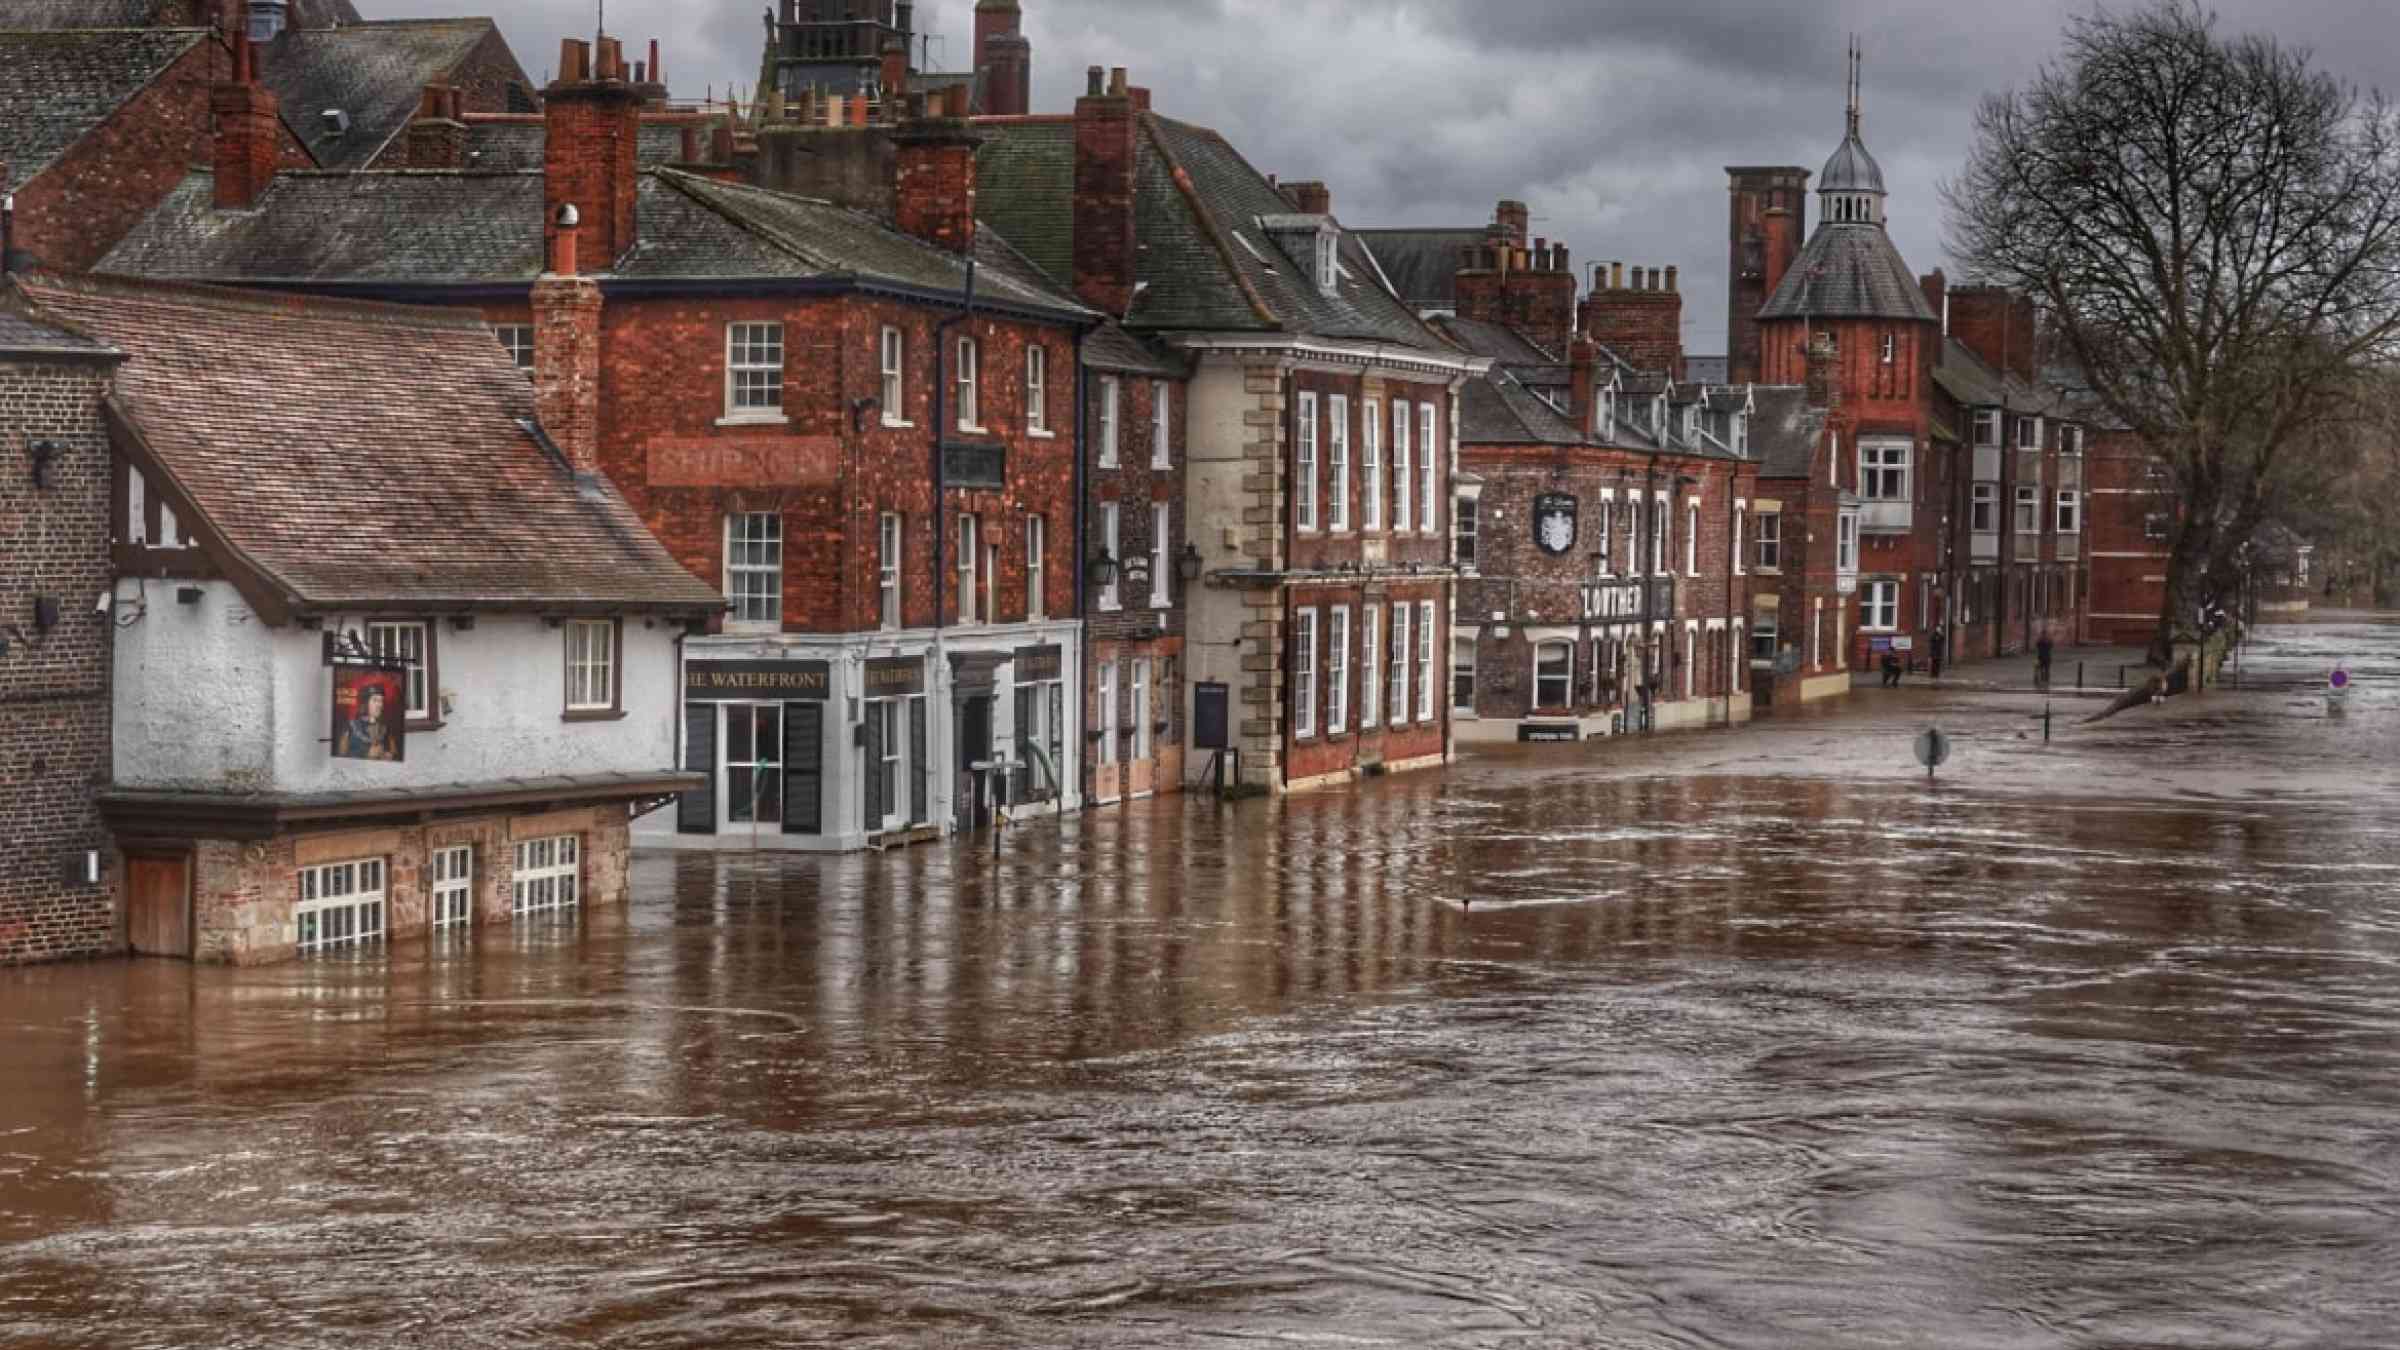 Flooded street in the city of York in the United Kingdom. The first story of the red brickstone houses is under water.